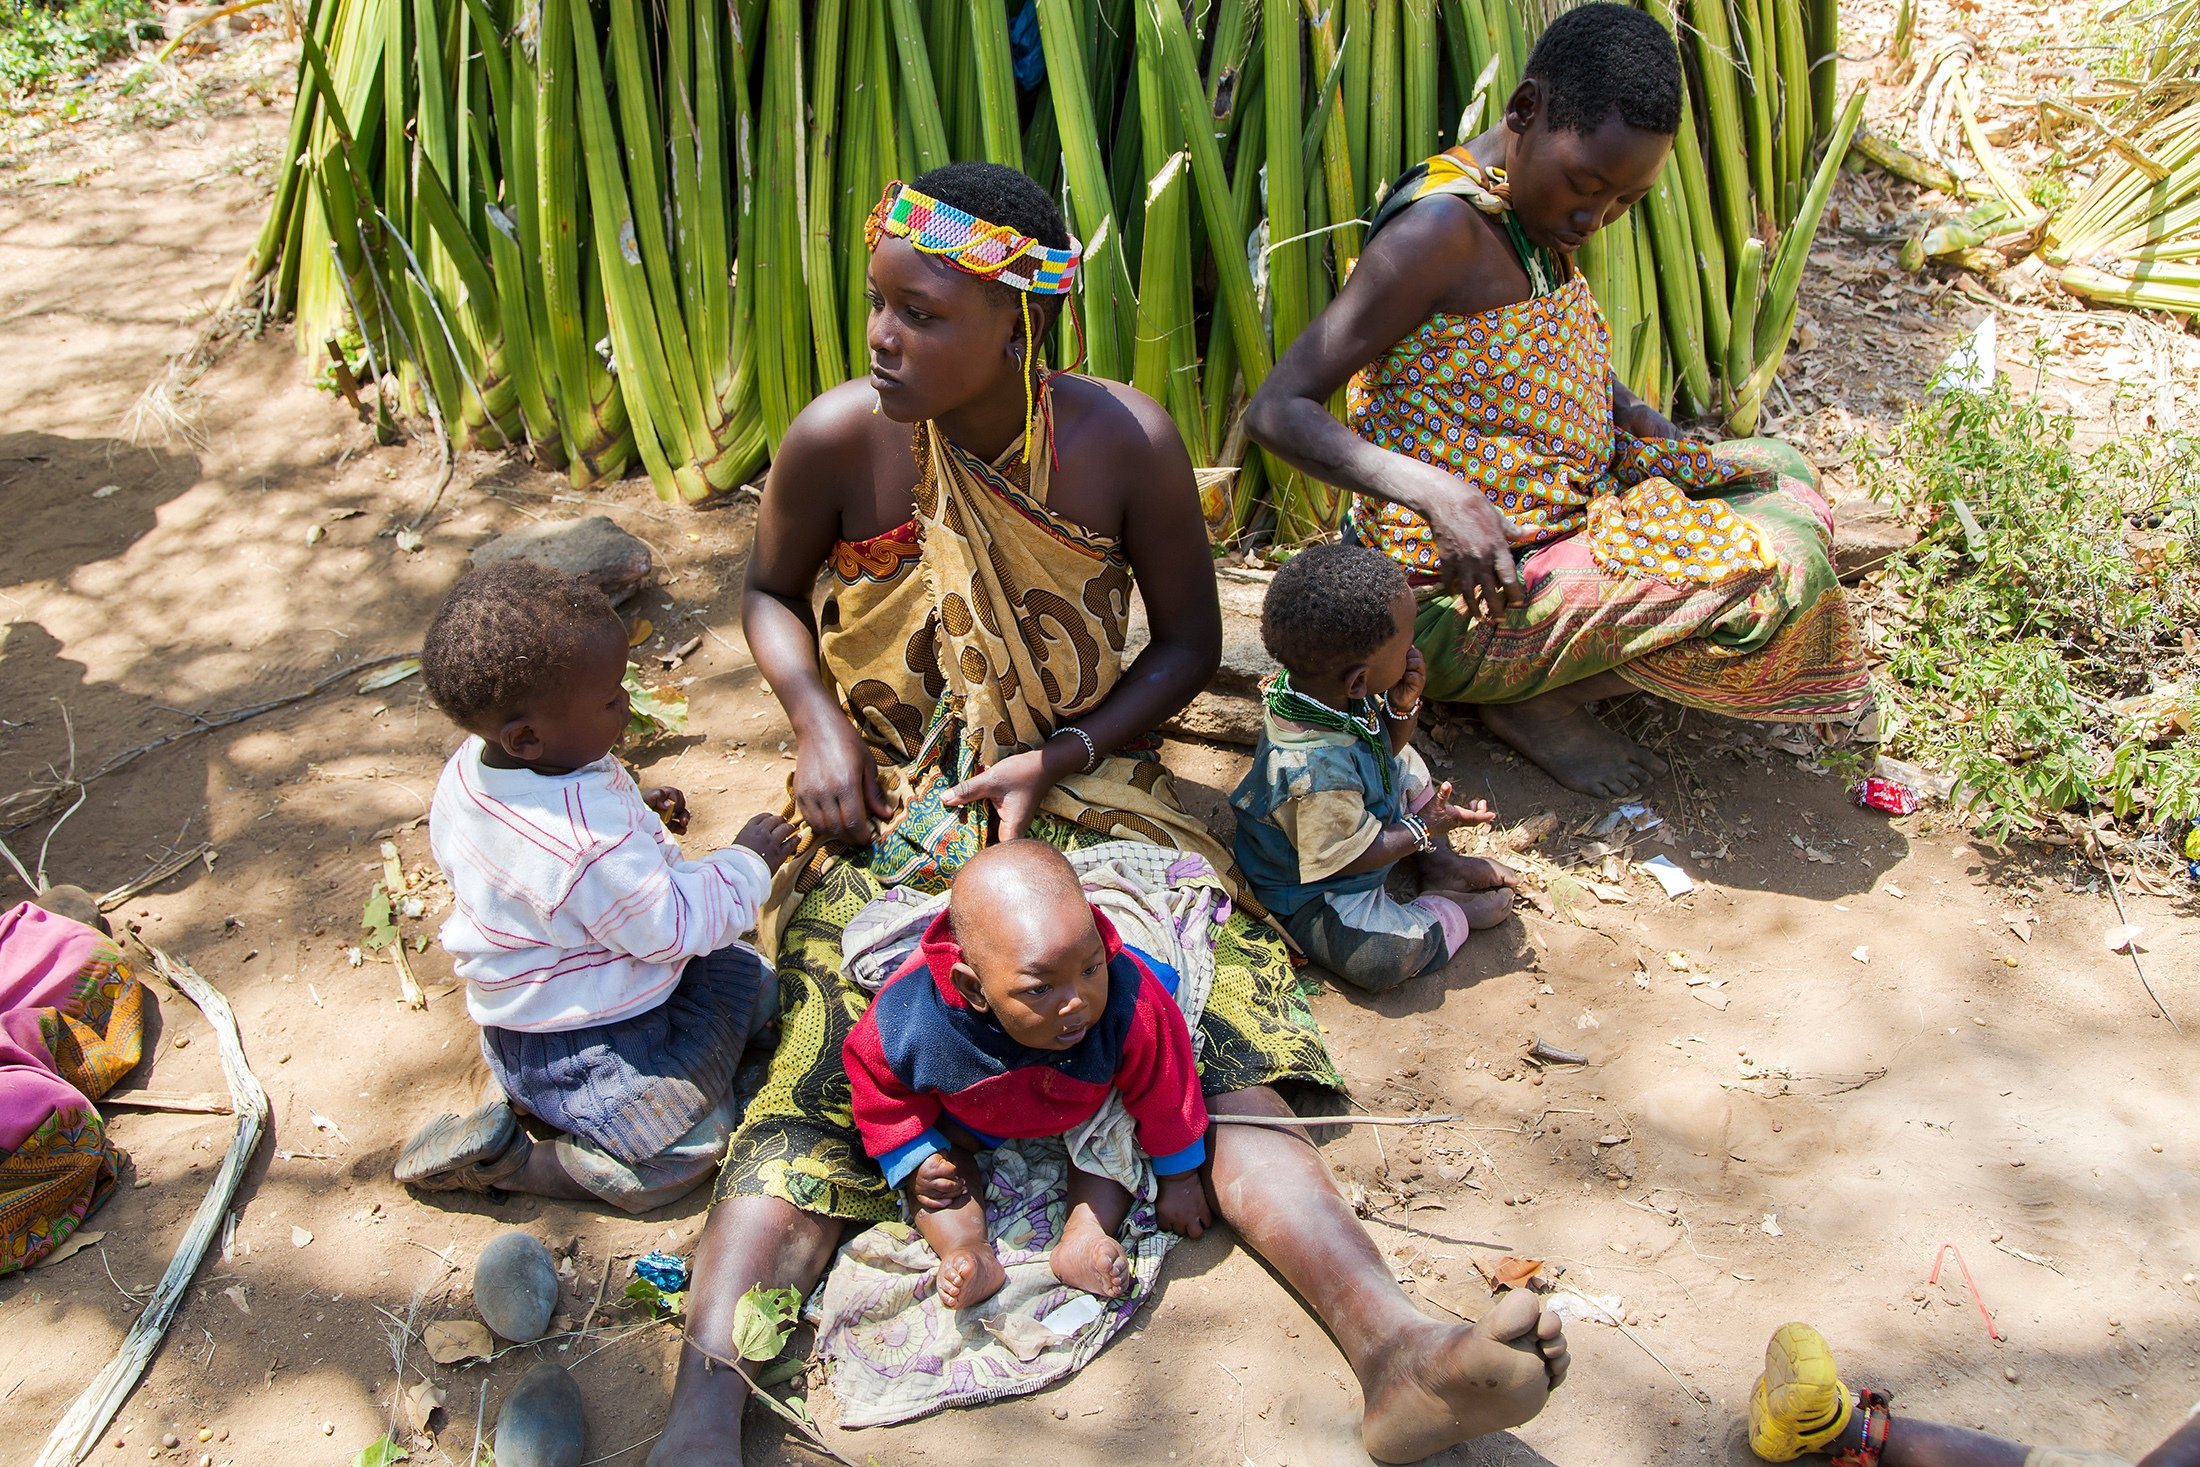 Hadza women sit with small children on the ground, in Tanzania, May 10, 2016. (Shutterstock Photo)